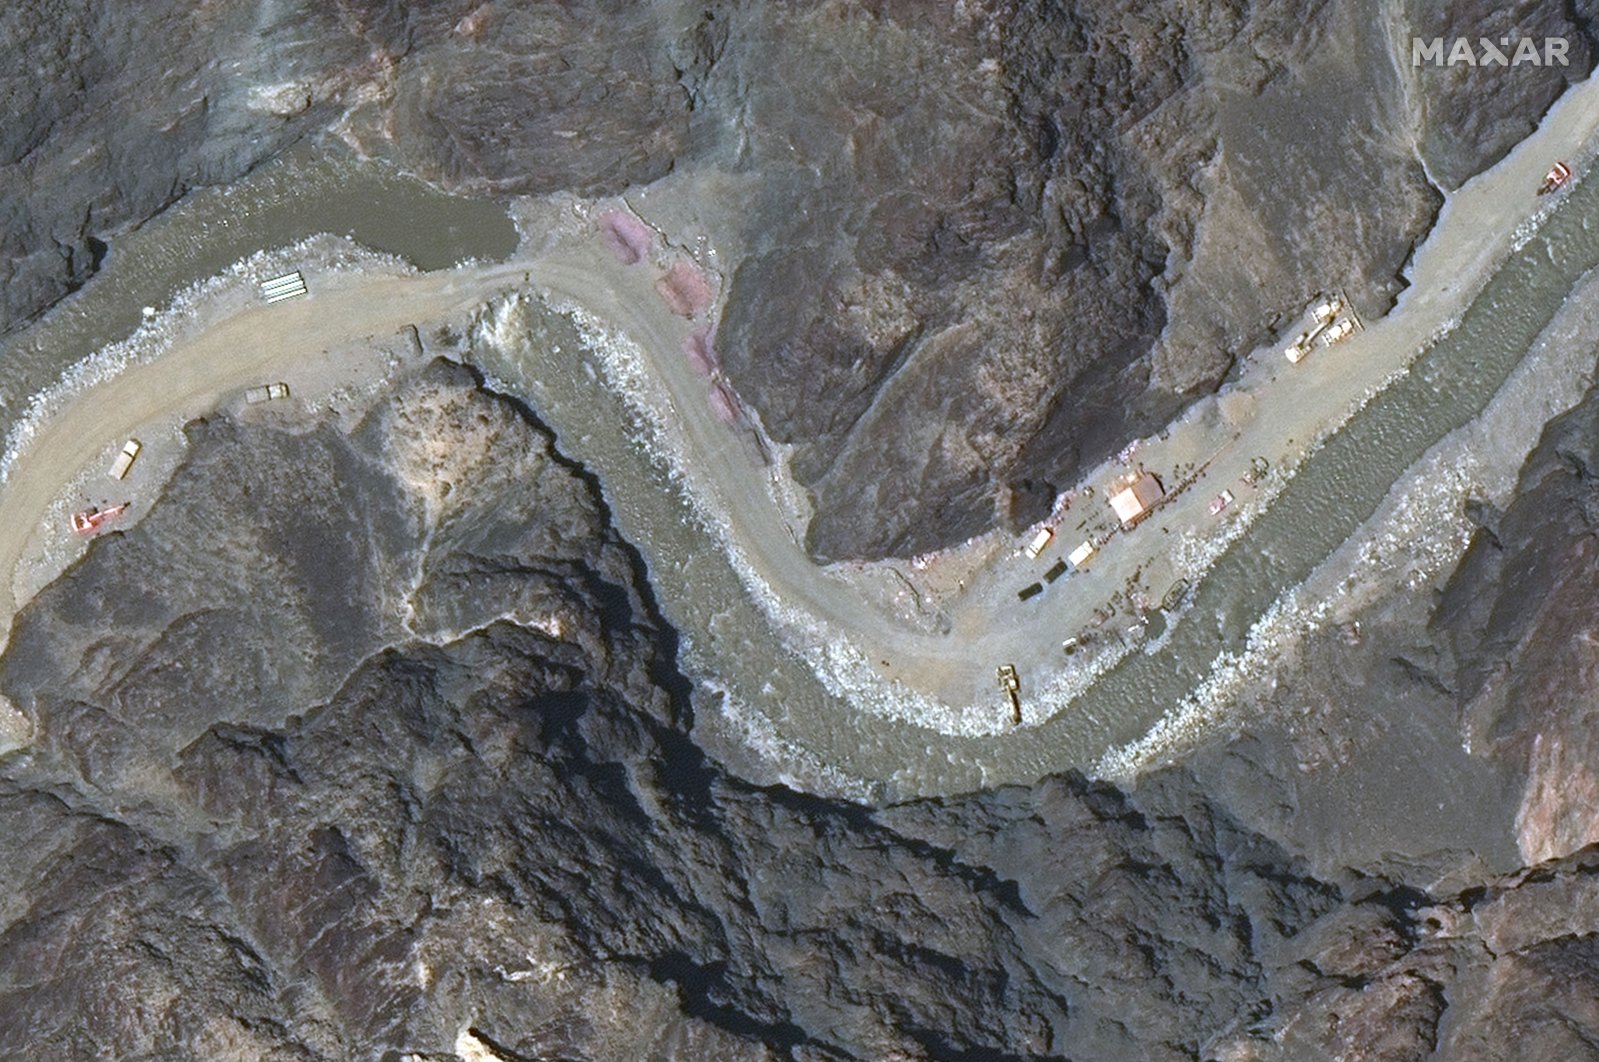 A satellite image provided by Maxar Technologies shows a road under construction near the Line of Actual Control, the border between India and China, June 22, 2020.  (Maxar Technologies via AP)